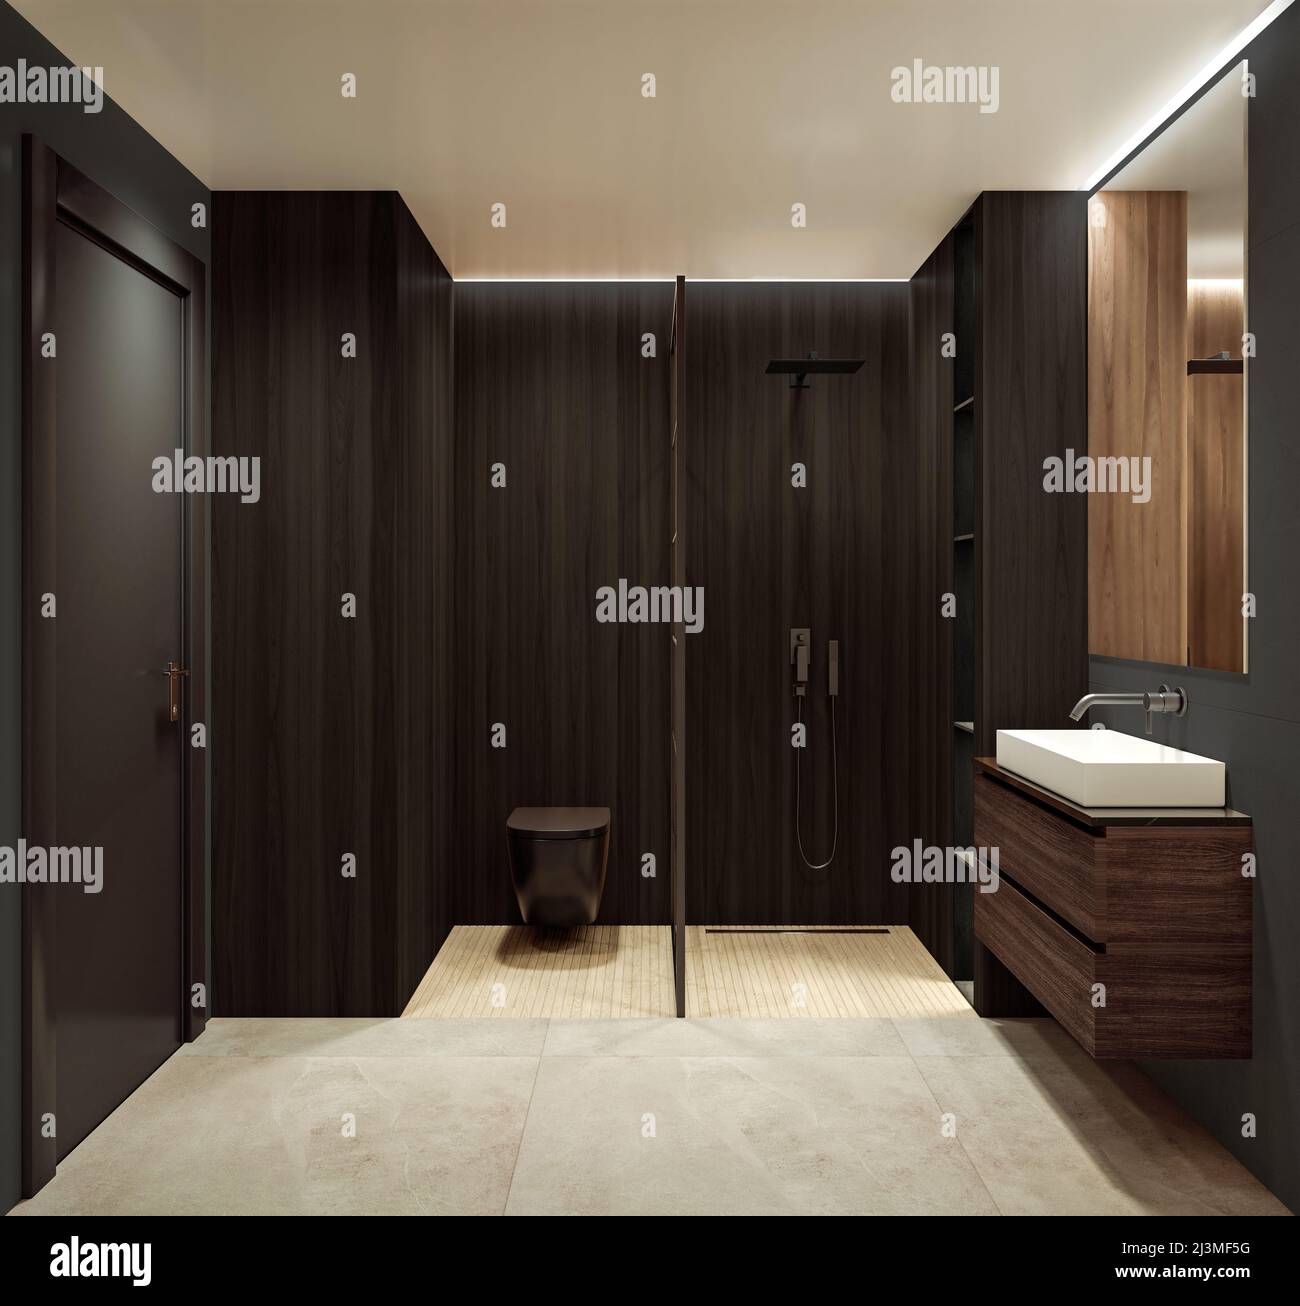 Modern interior design of bathroom shower, walnut wooden walls with rectangular mirror and vanity, minimalist and clean concept, 3d rendering Stock Photo